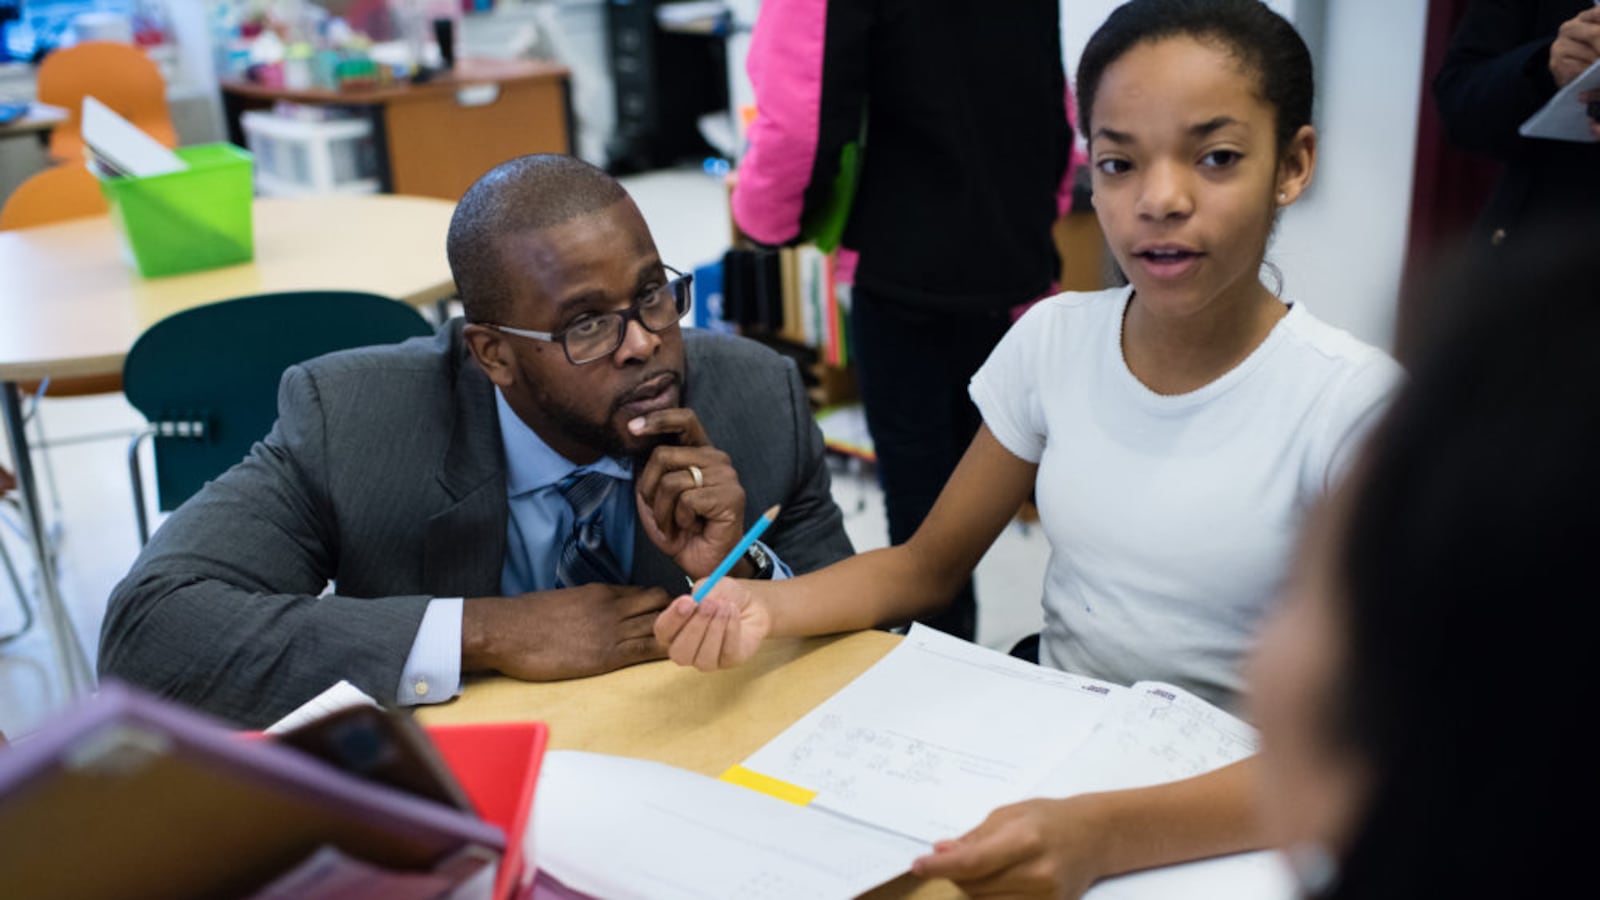 Antwan Wilson visits a fifth grade math class at the Brightwood Education Campus in Washington on his first day as D.C. schools chancellor. (Photo by Sarah L. Voisin/The Washington Post via Getty Images)